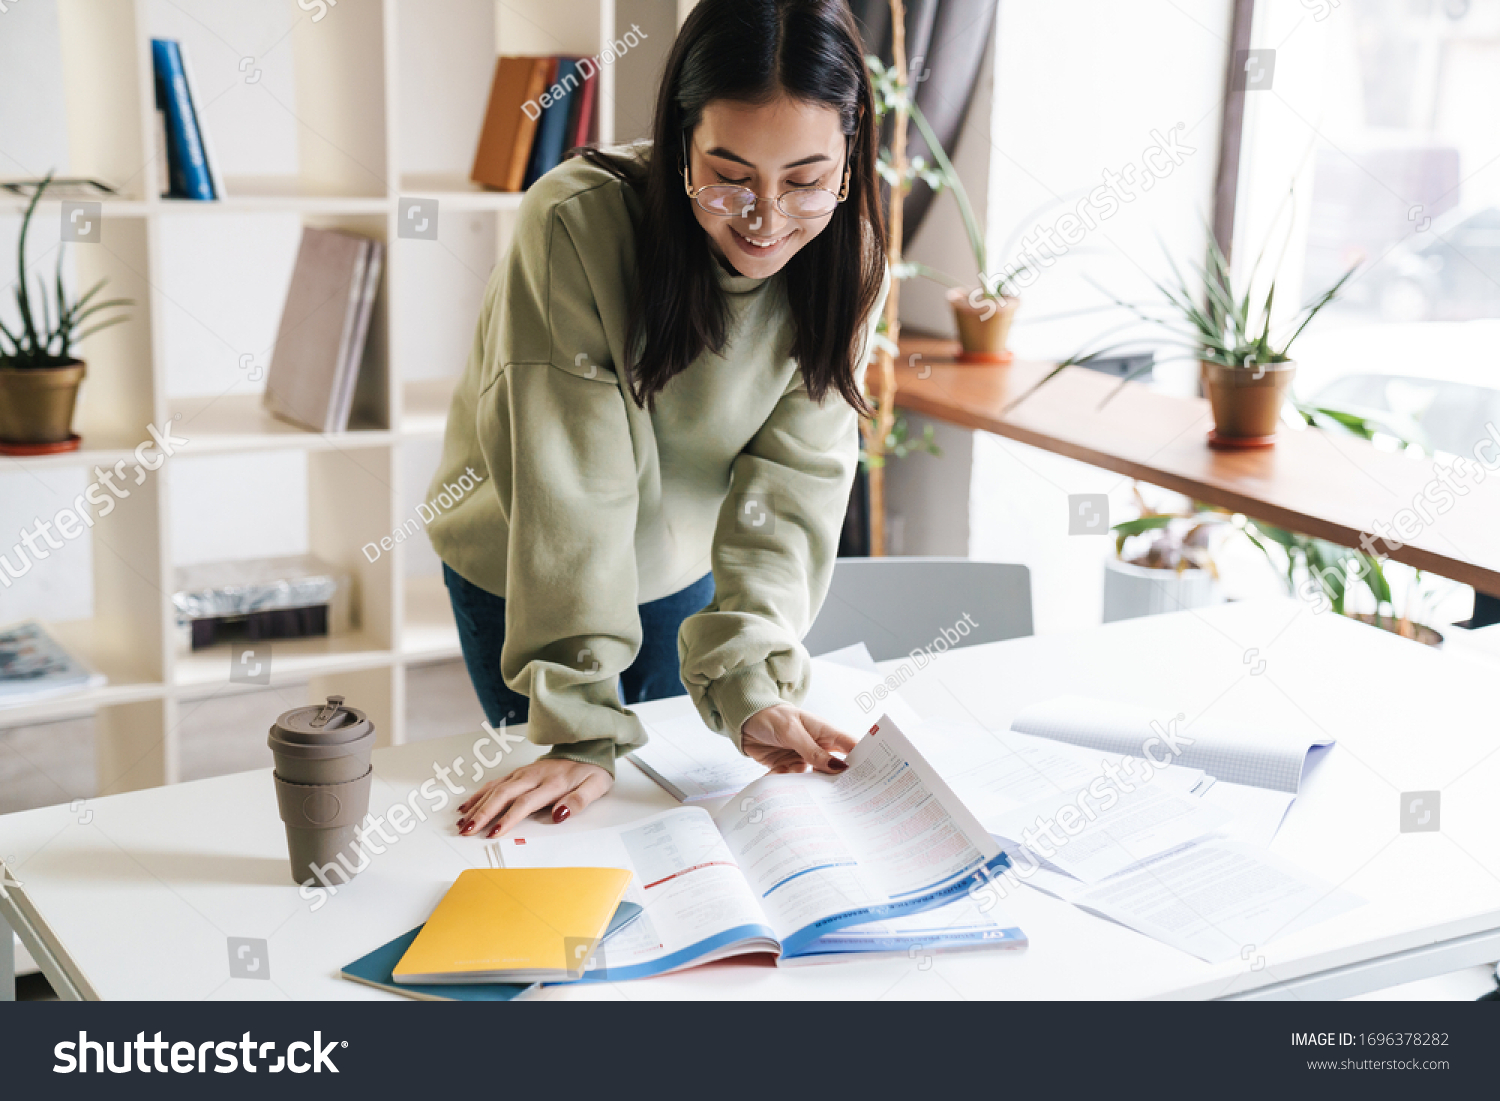 Image of a pretty happy smiling young girl student indoors studying. #1696378282